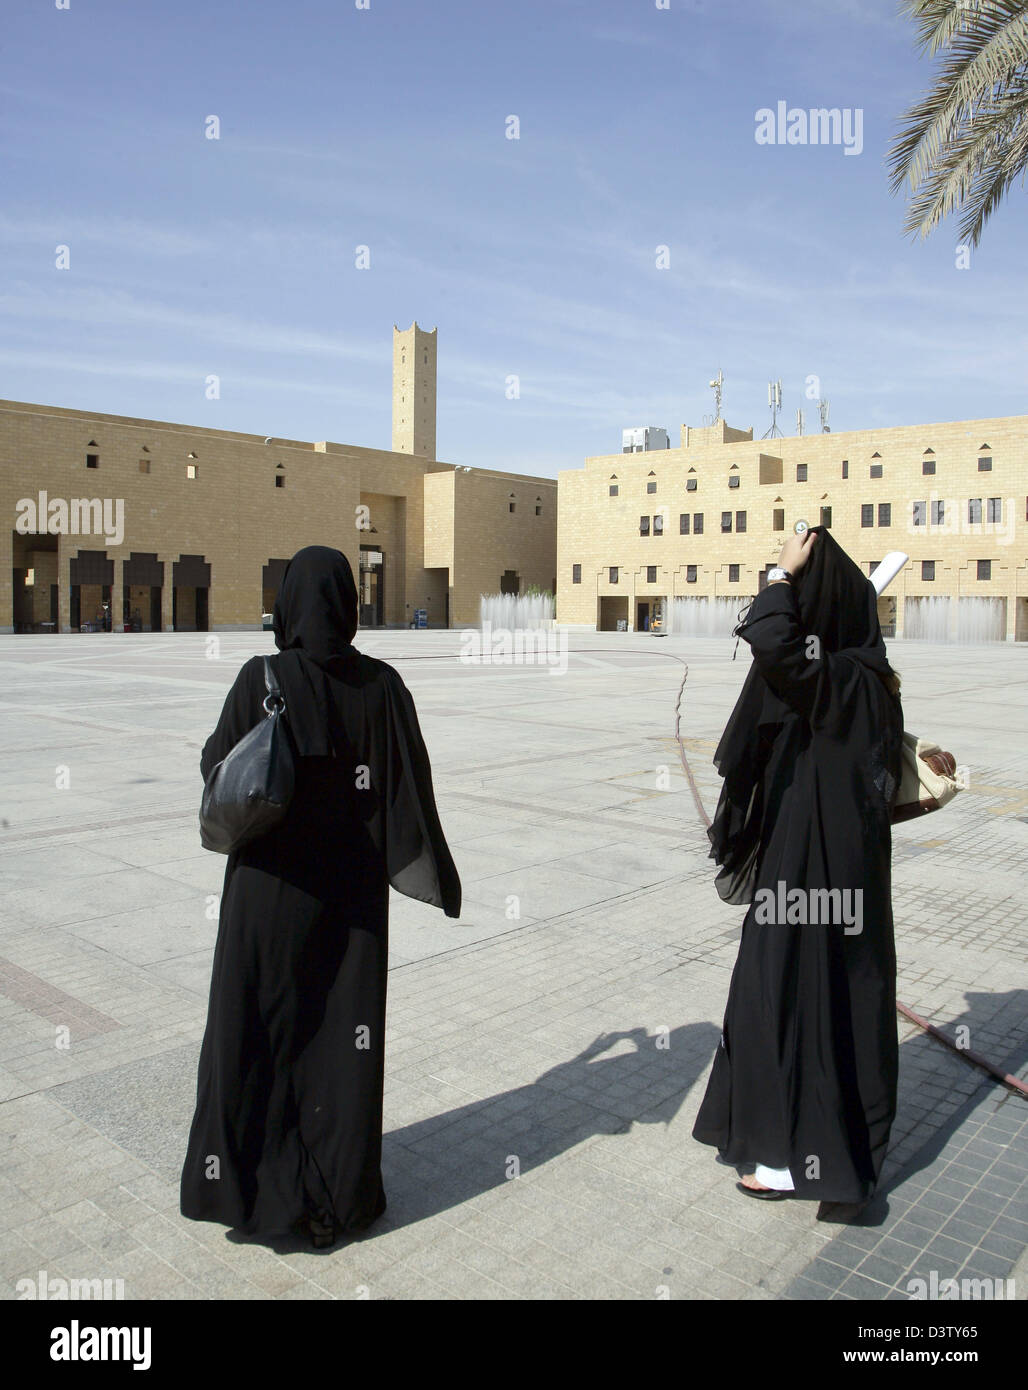 Two Arab women wearing chador pictured at the execution square with the religion police building (R) in Riyadh, Saudi Arabia, 15 November 2006. Photo: Peer Grimm Stock Photo